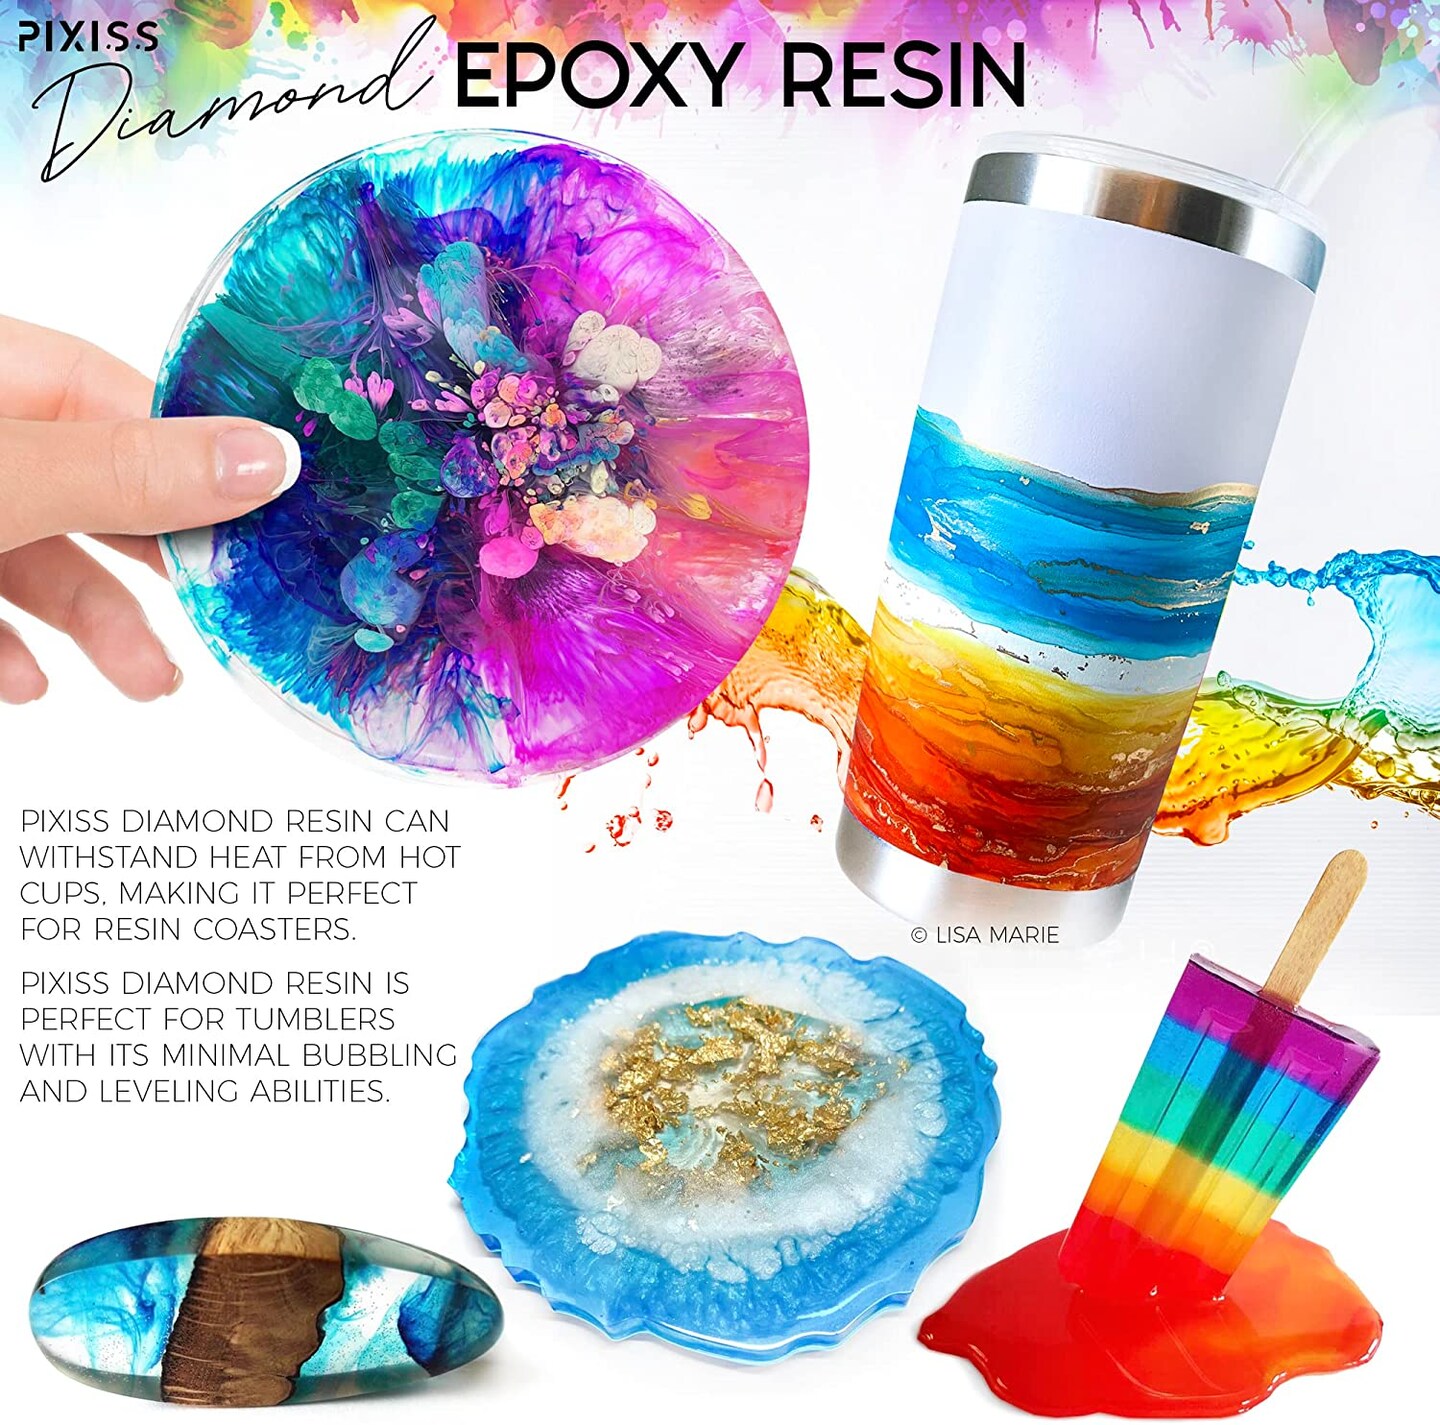  DR CRAFTY Clear Epoxy Resin - Table Top Epoxy Resin Kit - 1  Gallon Epoxy Resin for Resin Molds, Table Top, Art Resin, Craft, Jewelry  Casting, DIY, Tumblers & Wood 